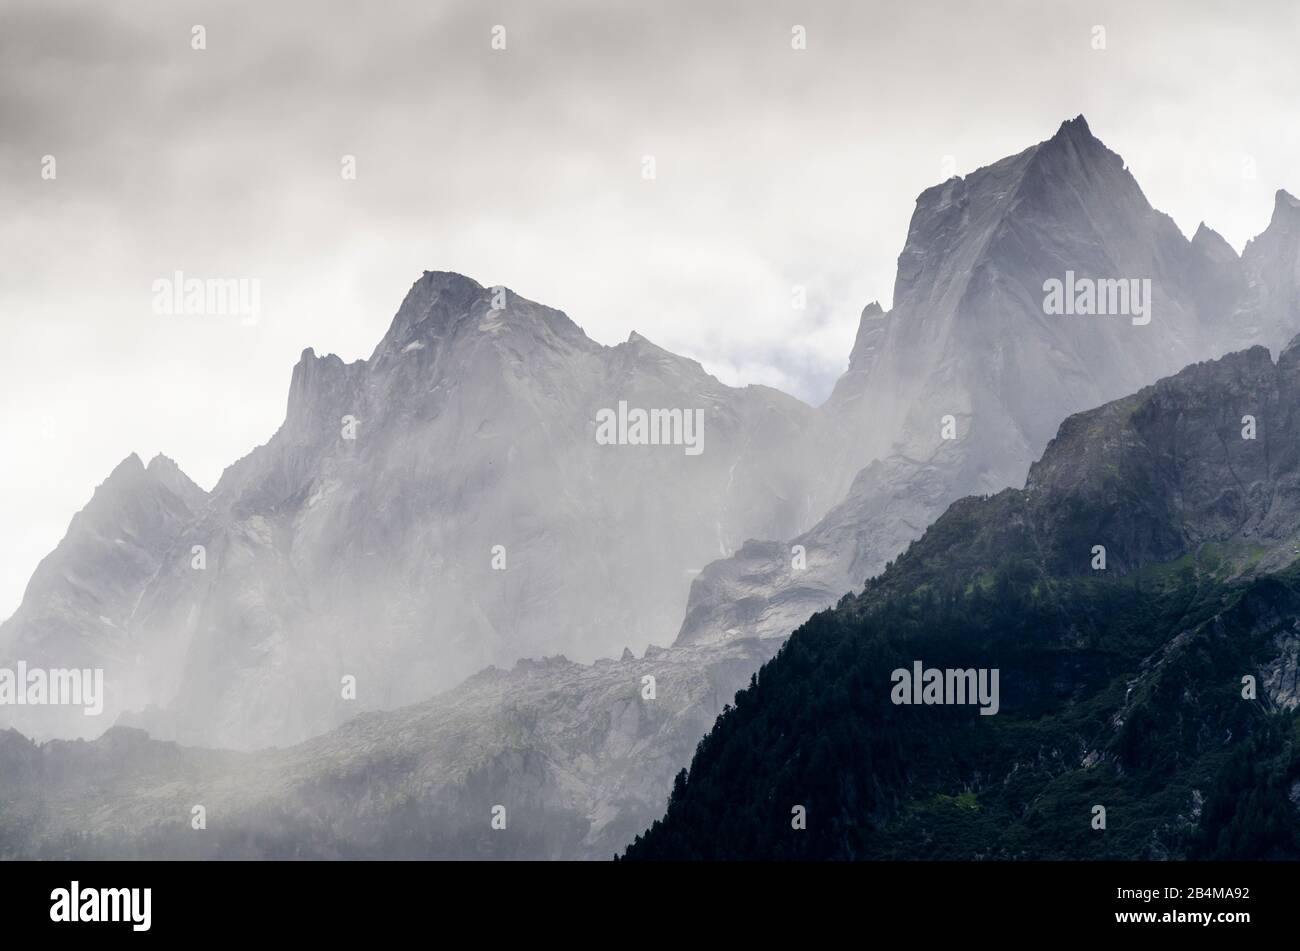 Switzerland, Graubünden, Bergell, Soglio, Piz Badile northeast wall and Piz Cengalo in the fog two days before the big landslide in August 2017 Stock Photo